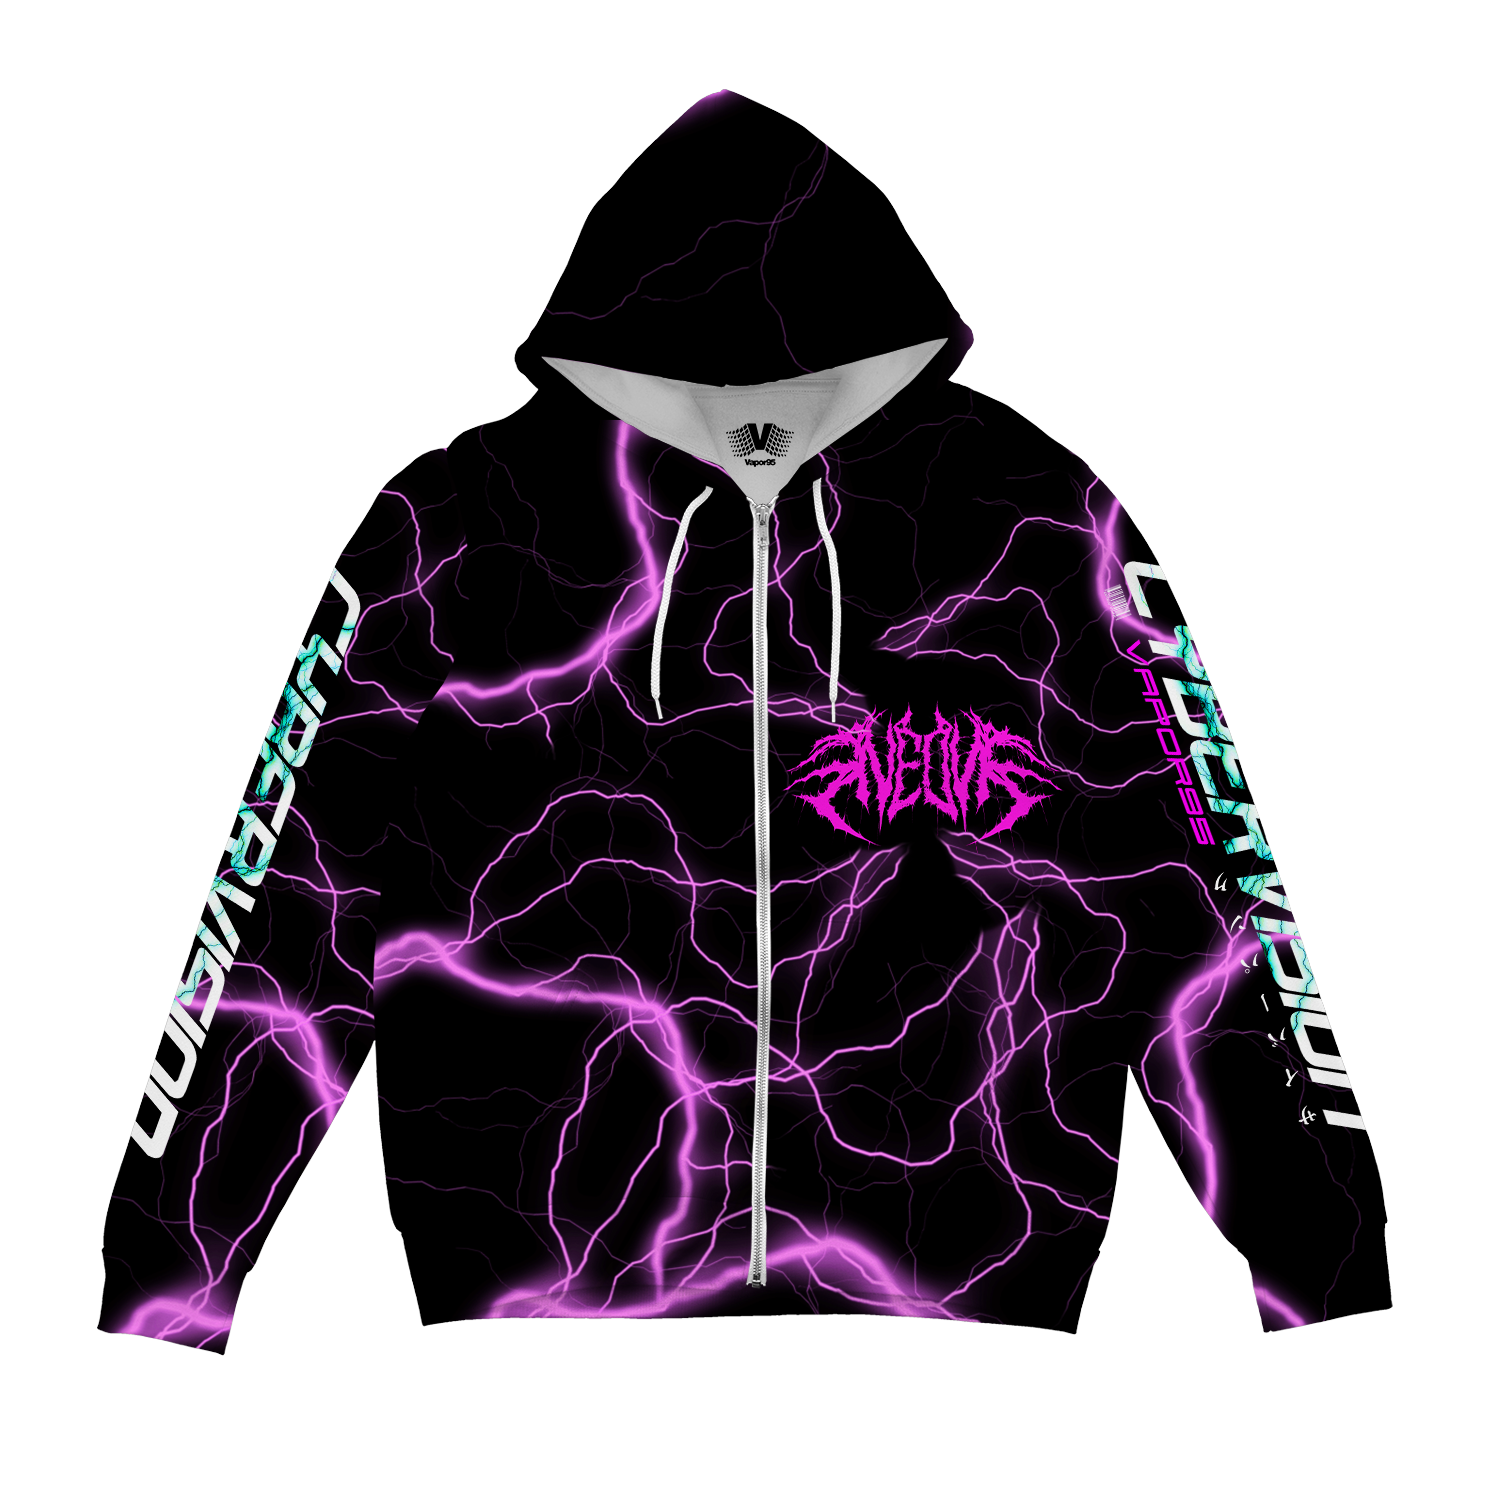 Cybervision Zip Up Hoodie